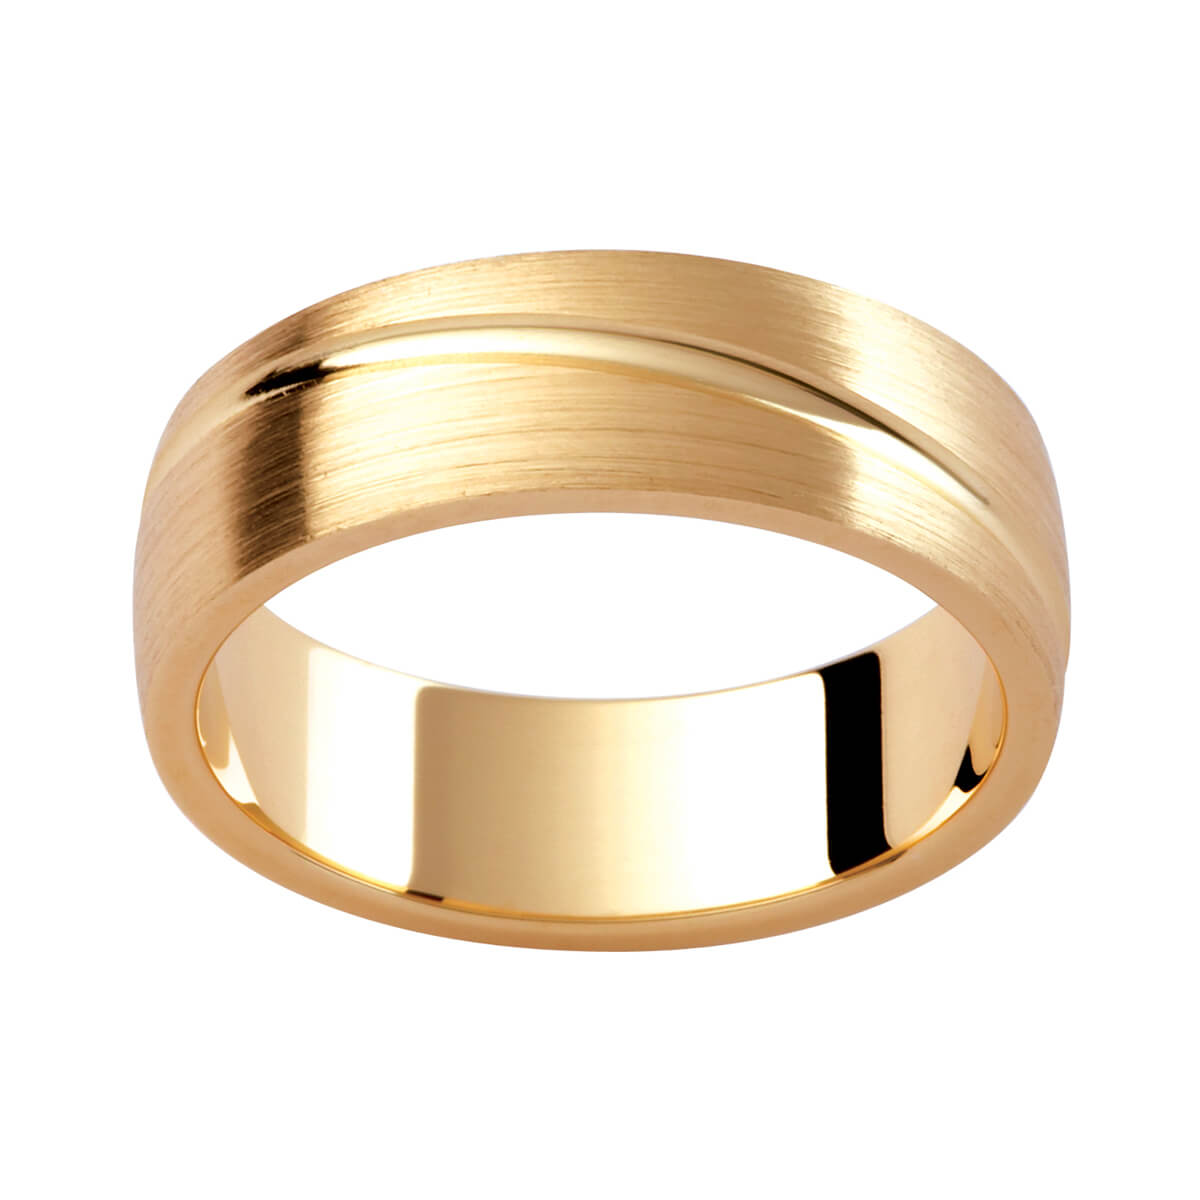 P340 men's ring in a brushed finish with polished groove